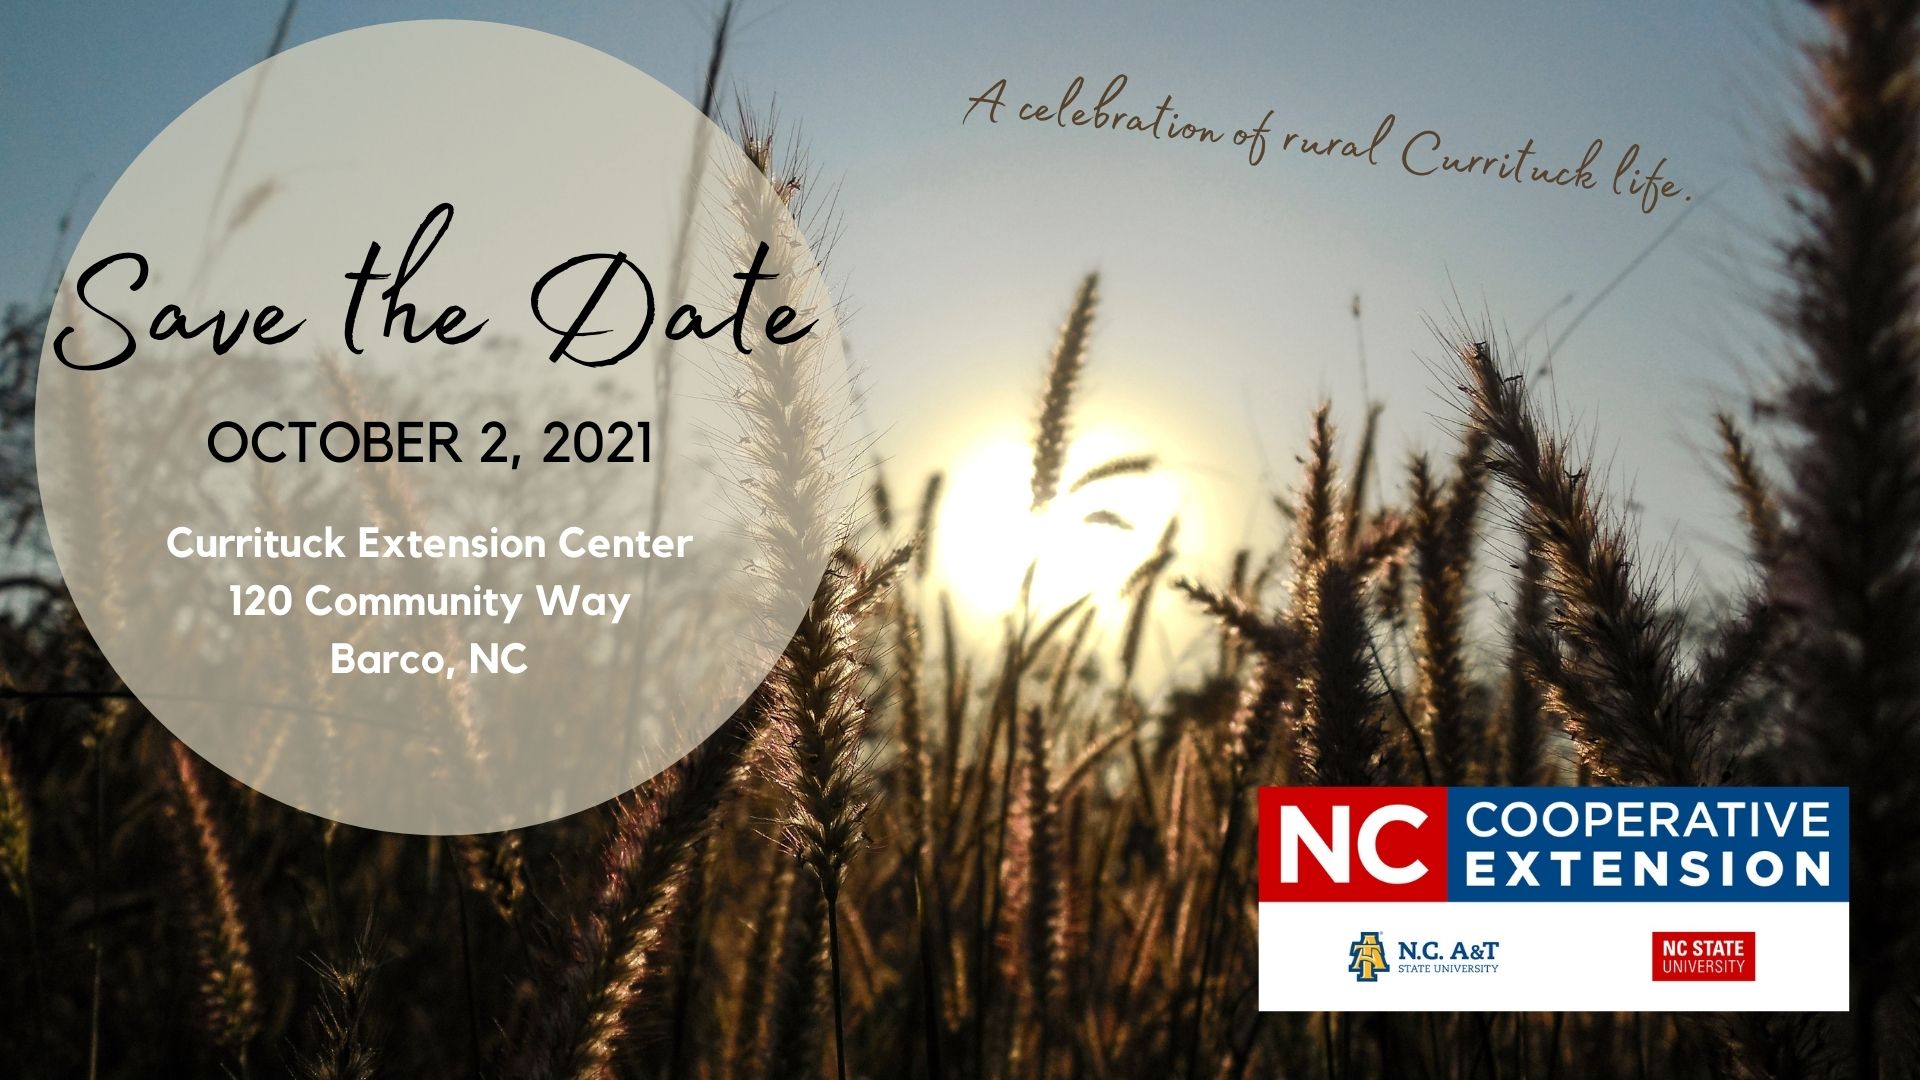 Farm field in background with "Save the Date" A Celebration of rural Currituck Life